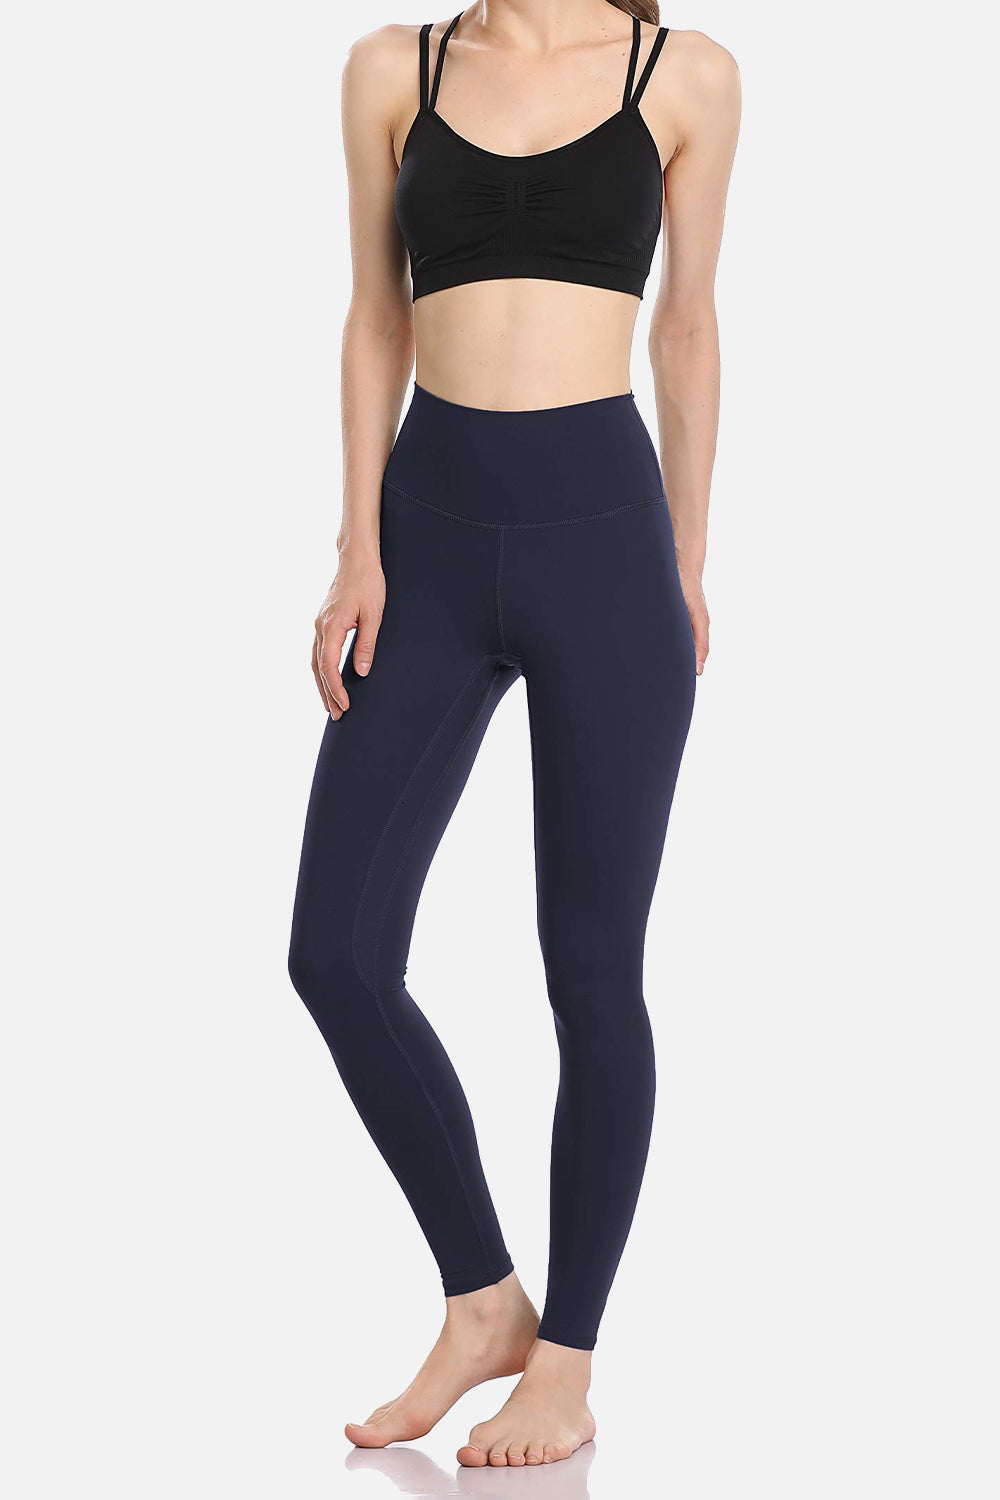 Conceited Black/White Premium Buttery Soft High Waisted Leggings